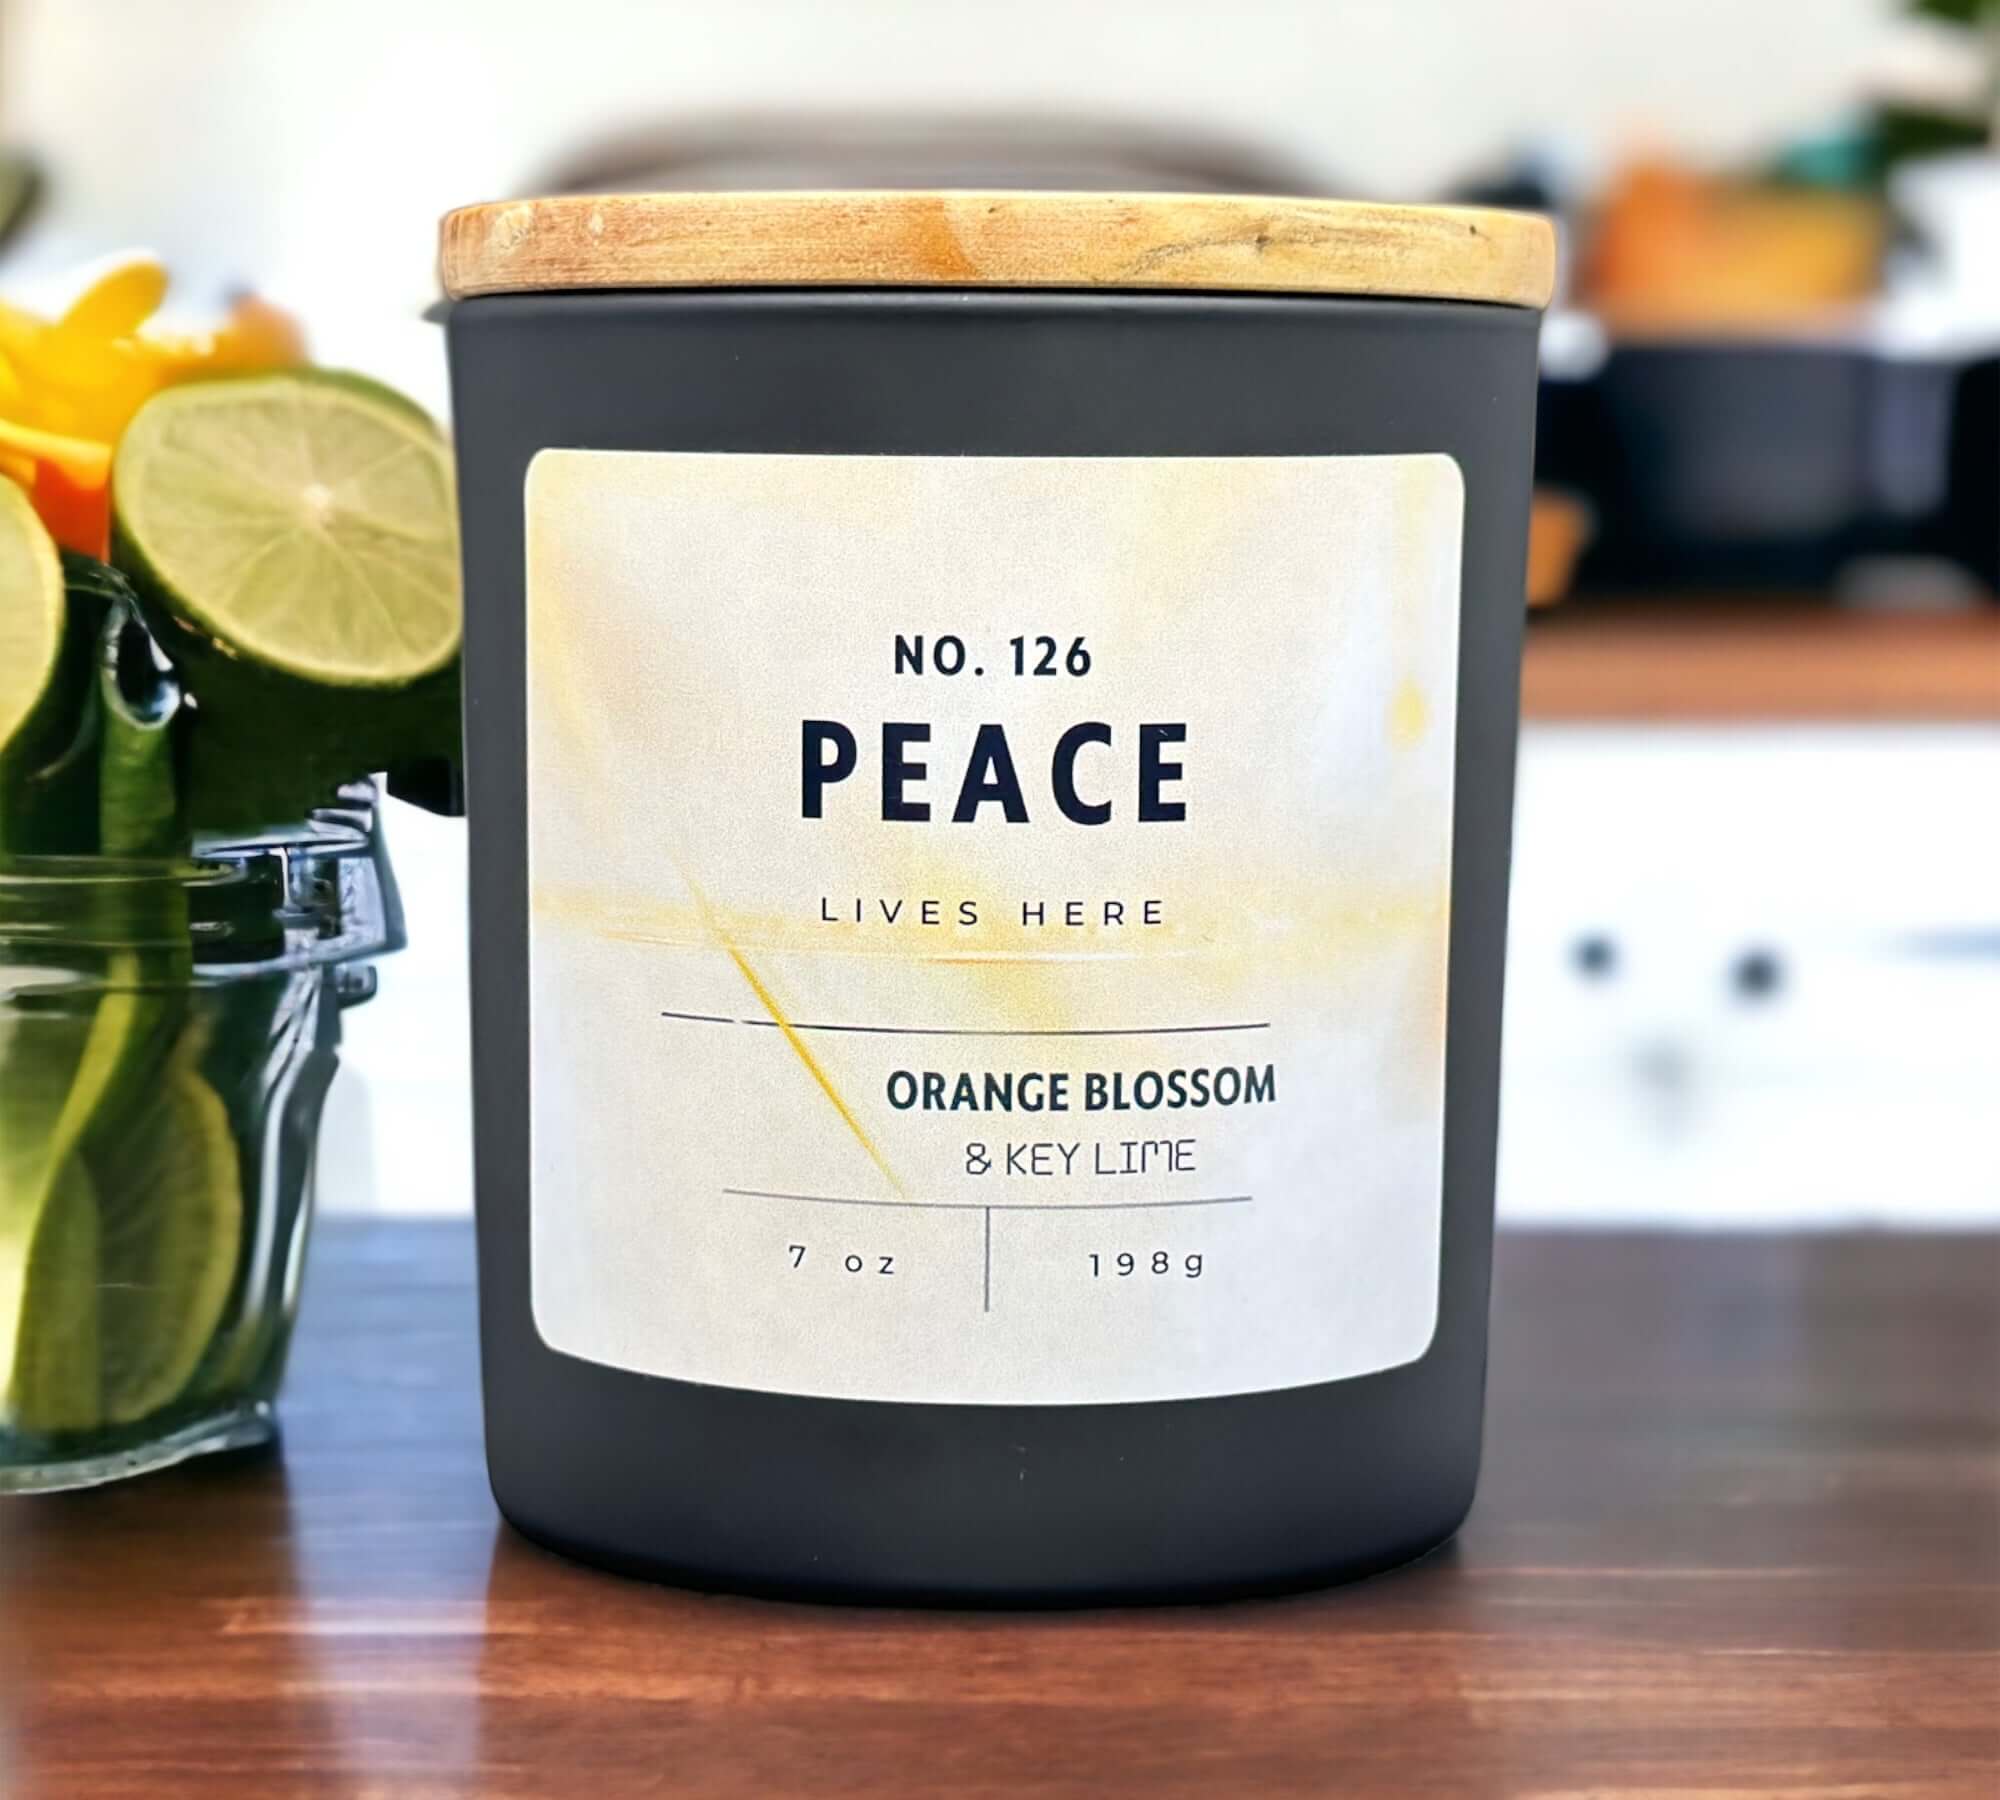 Peace lives here candle. Orange blossom and key lime candle